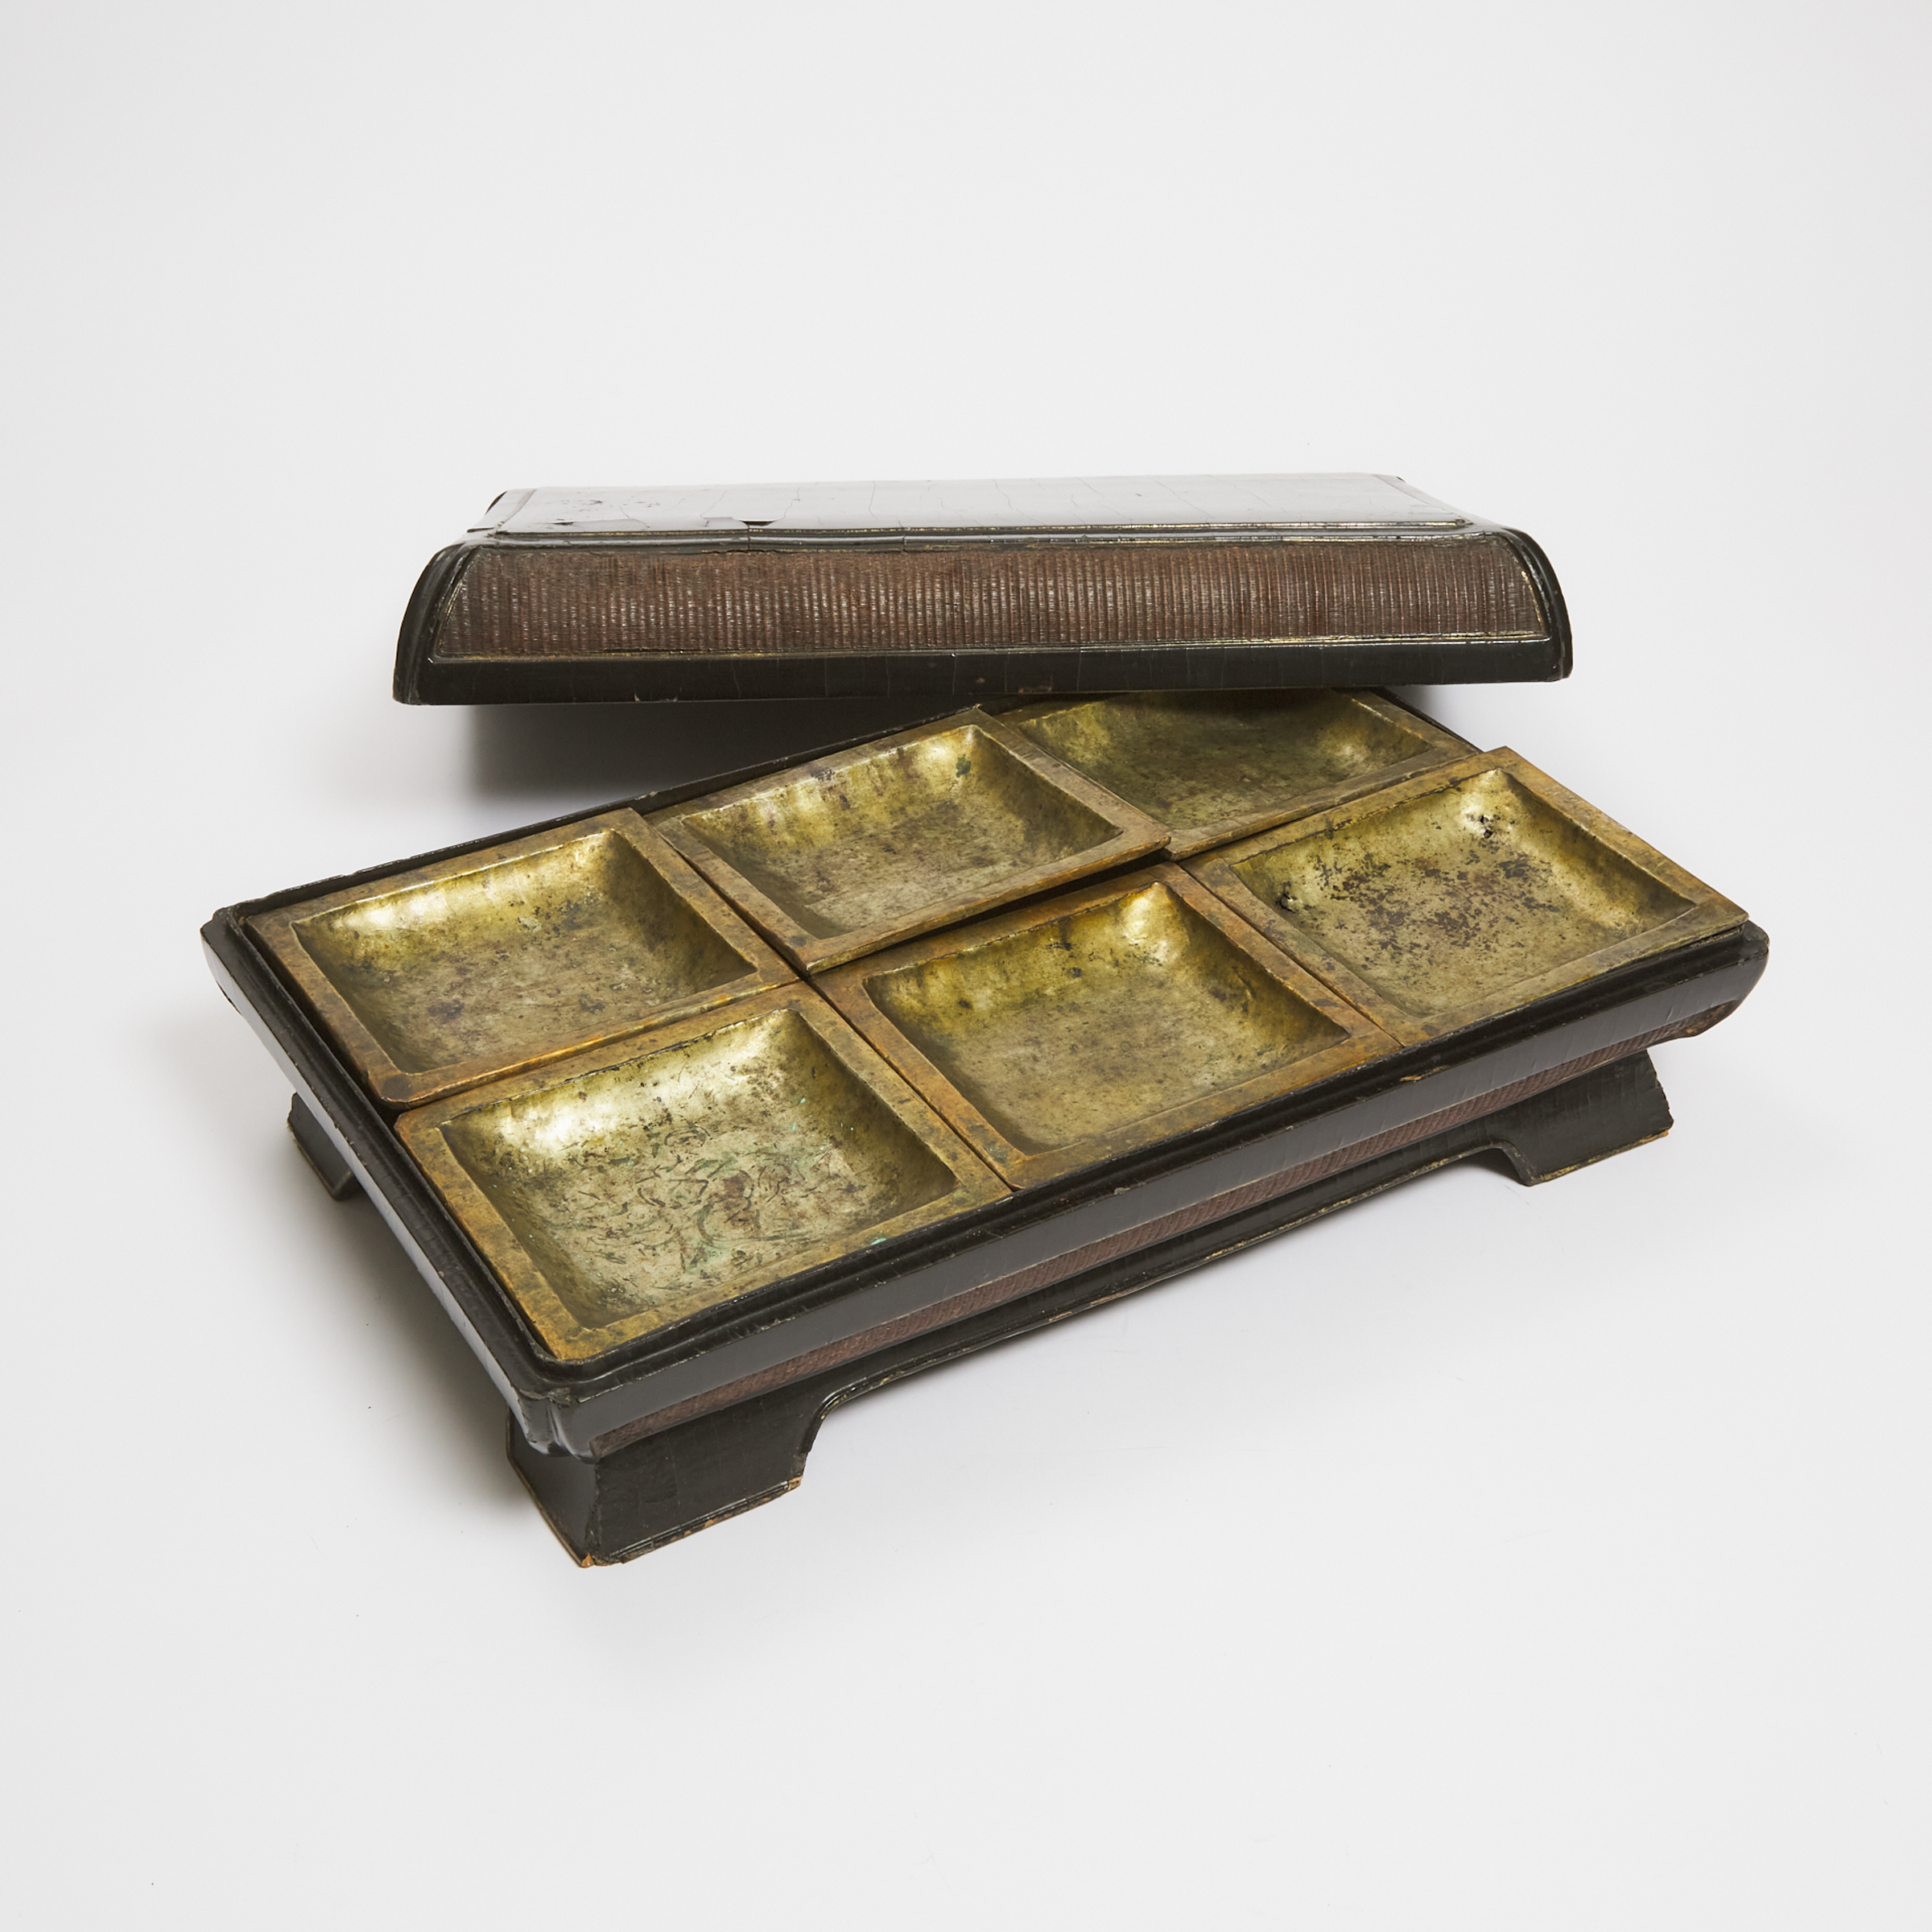 A Chinese Gilt Lacquered Rectangular Box and Cover with Six Interior Trays, 19th Century